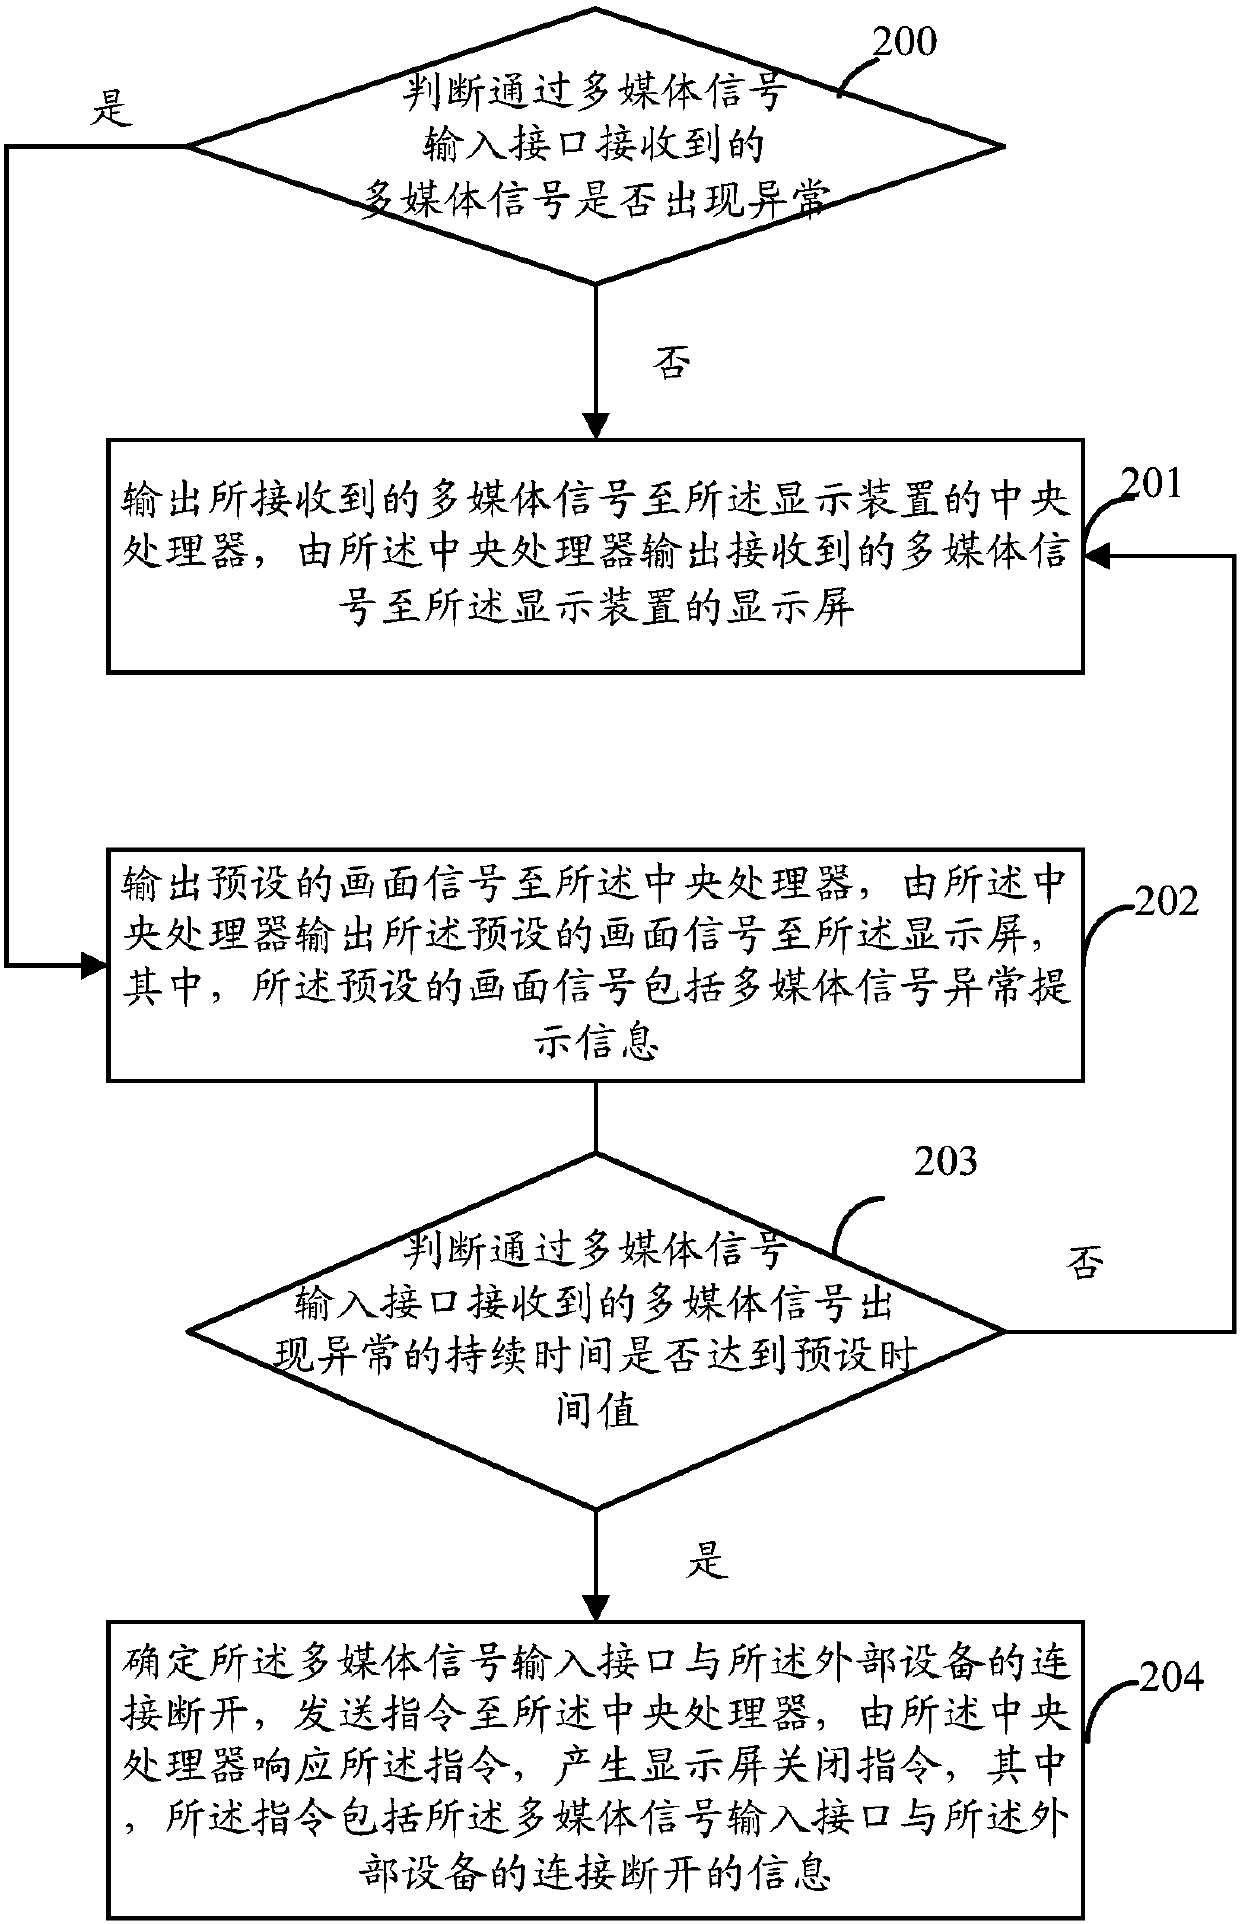 Method and display device for processing abnormality of a multimedia signal